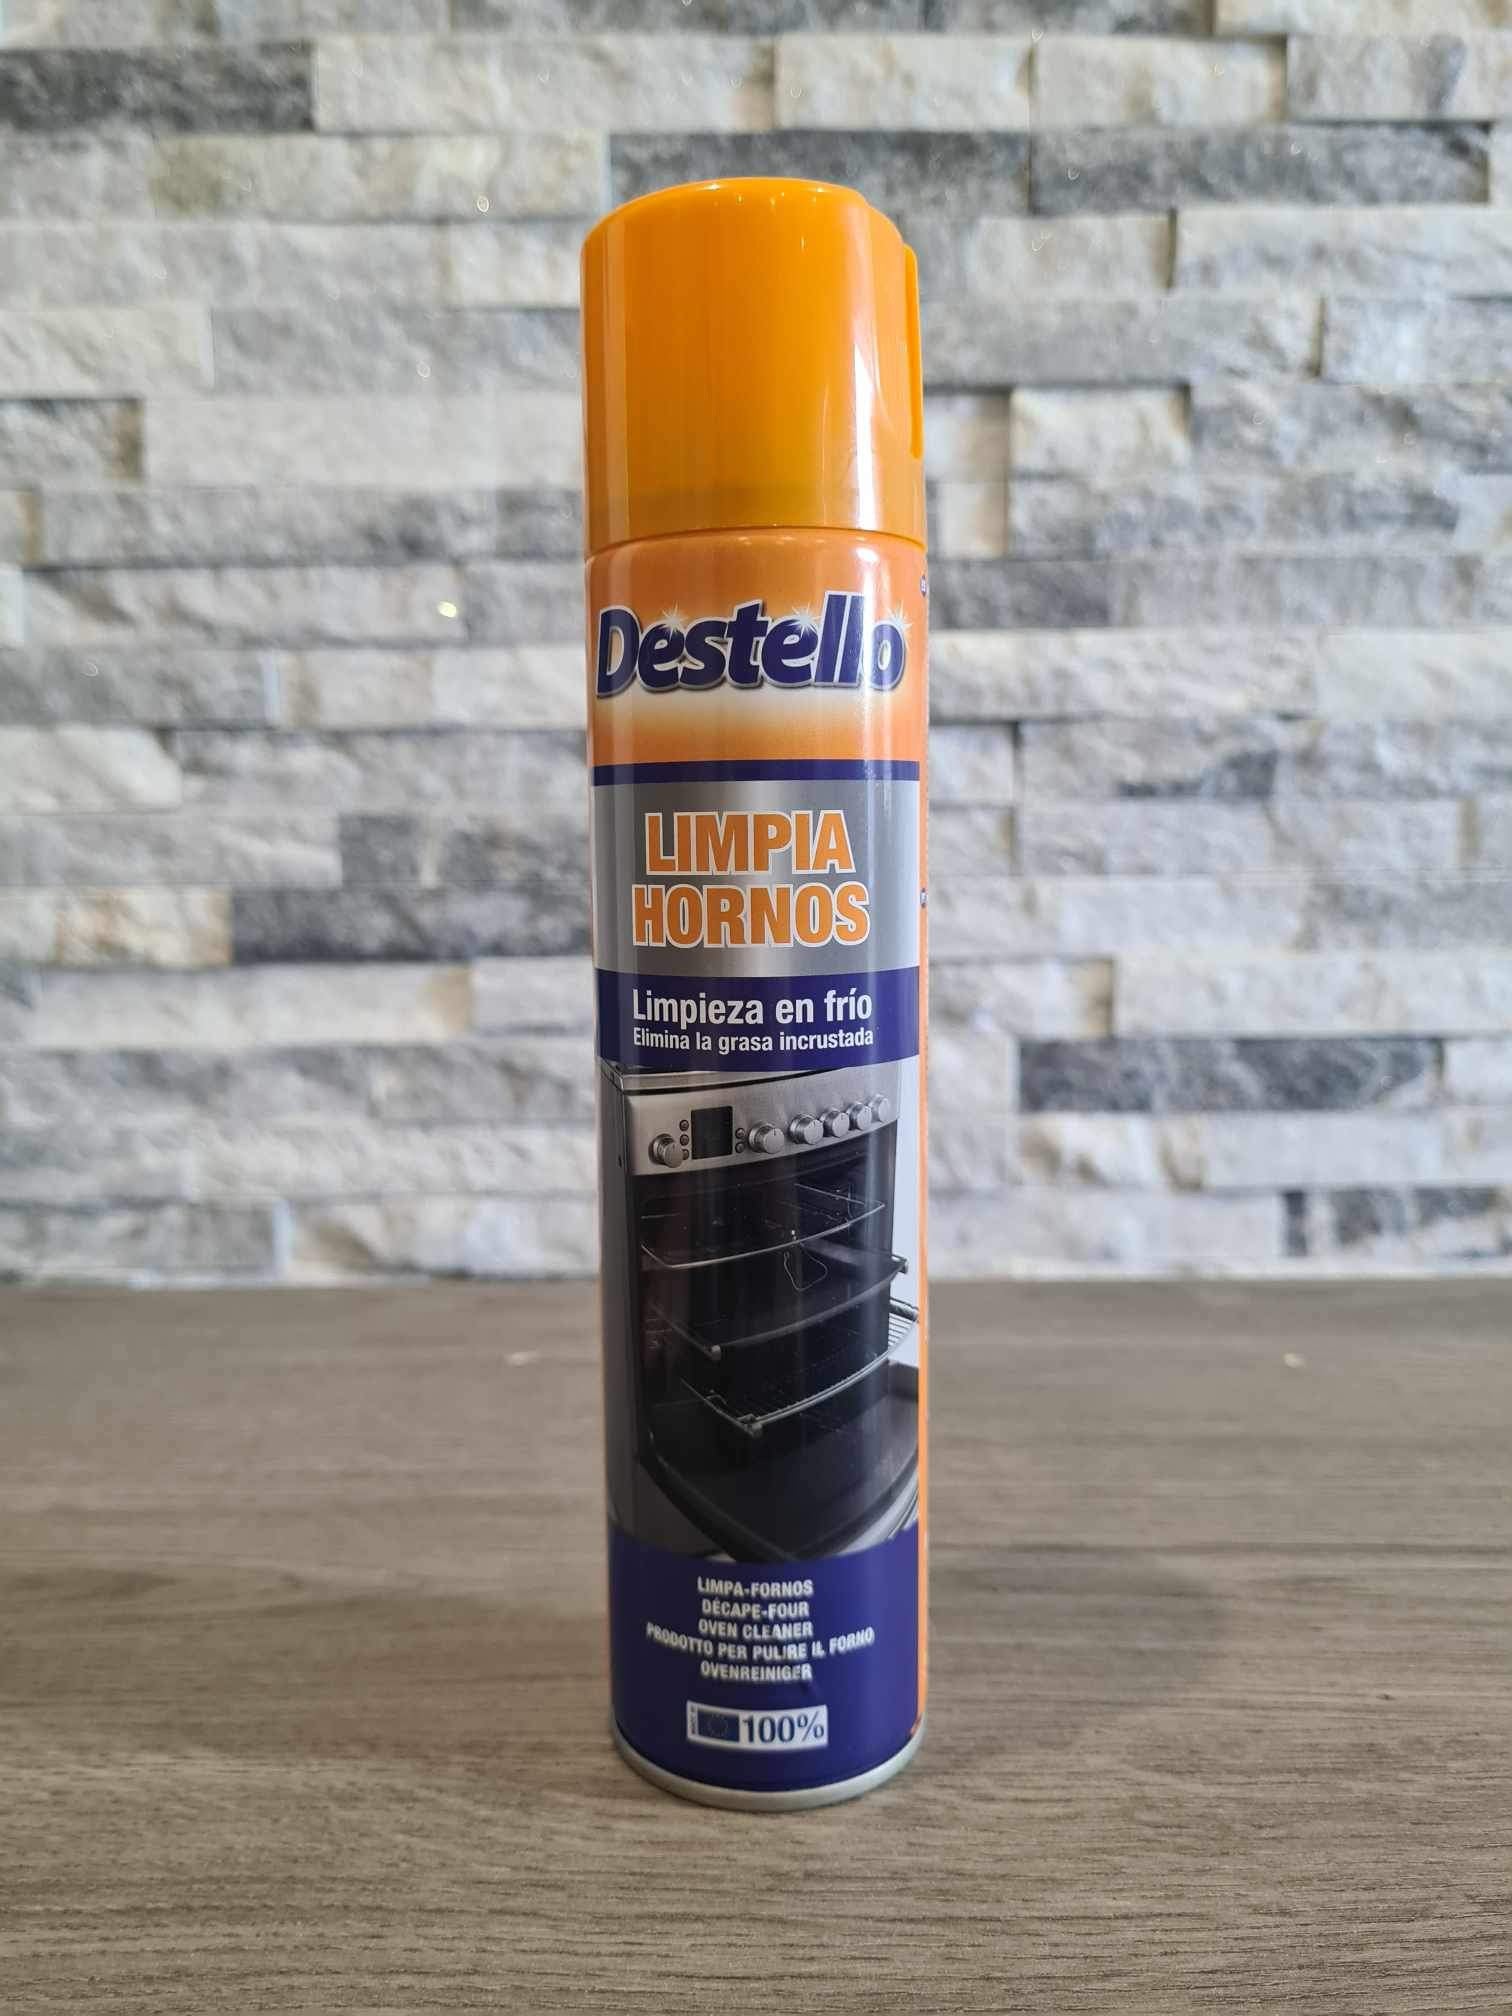 Destello Oven Cleaner- Cleans Cold! – Spanish kleen freaks cardiff